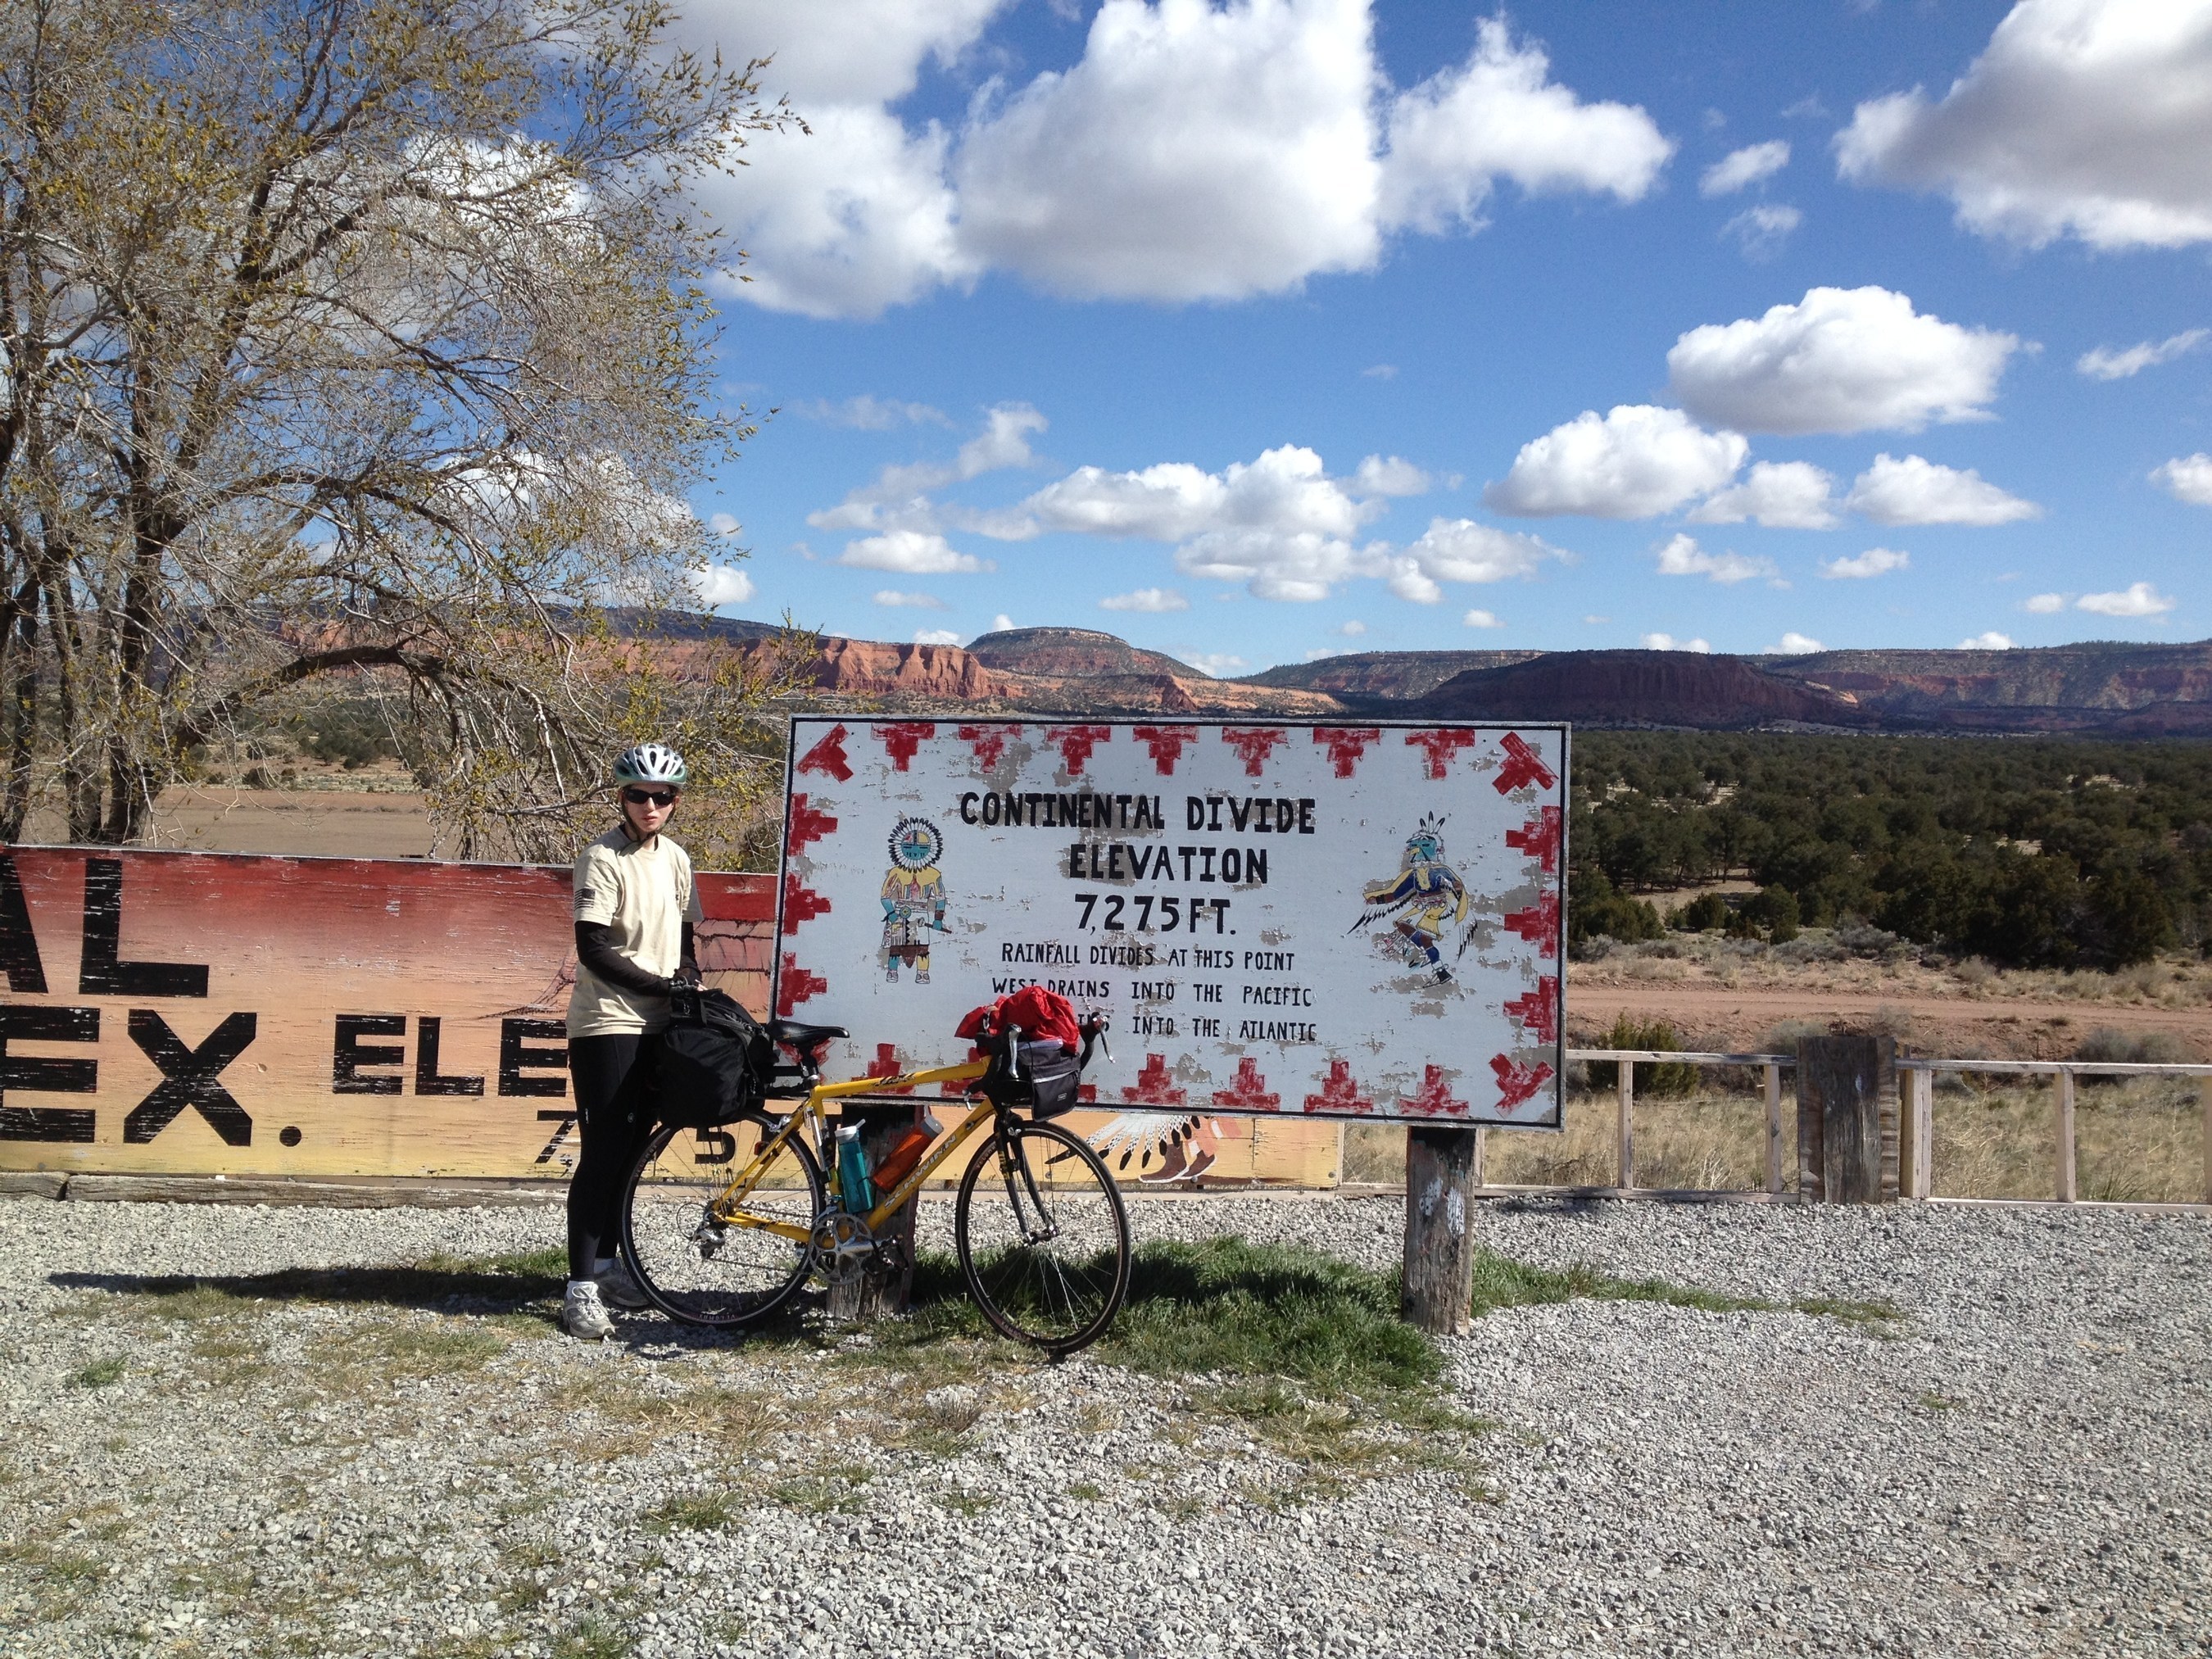 Patricia Waiwood at the Continental Divide during her CA to NY ride in 2014